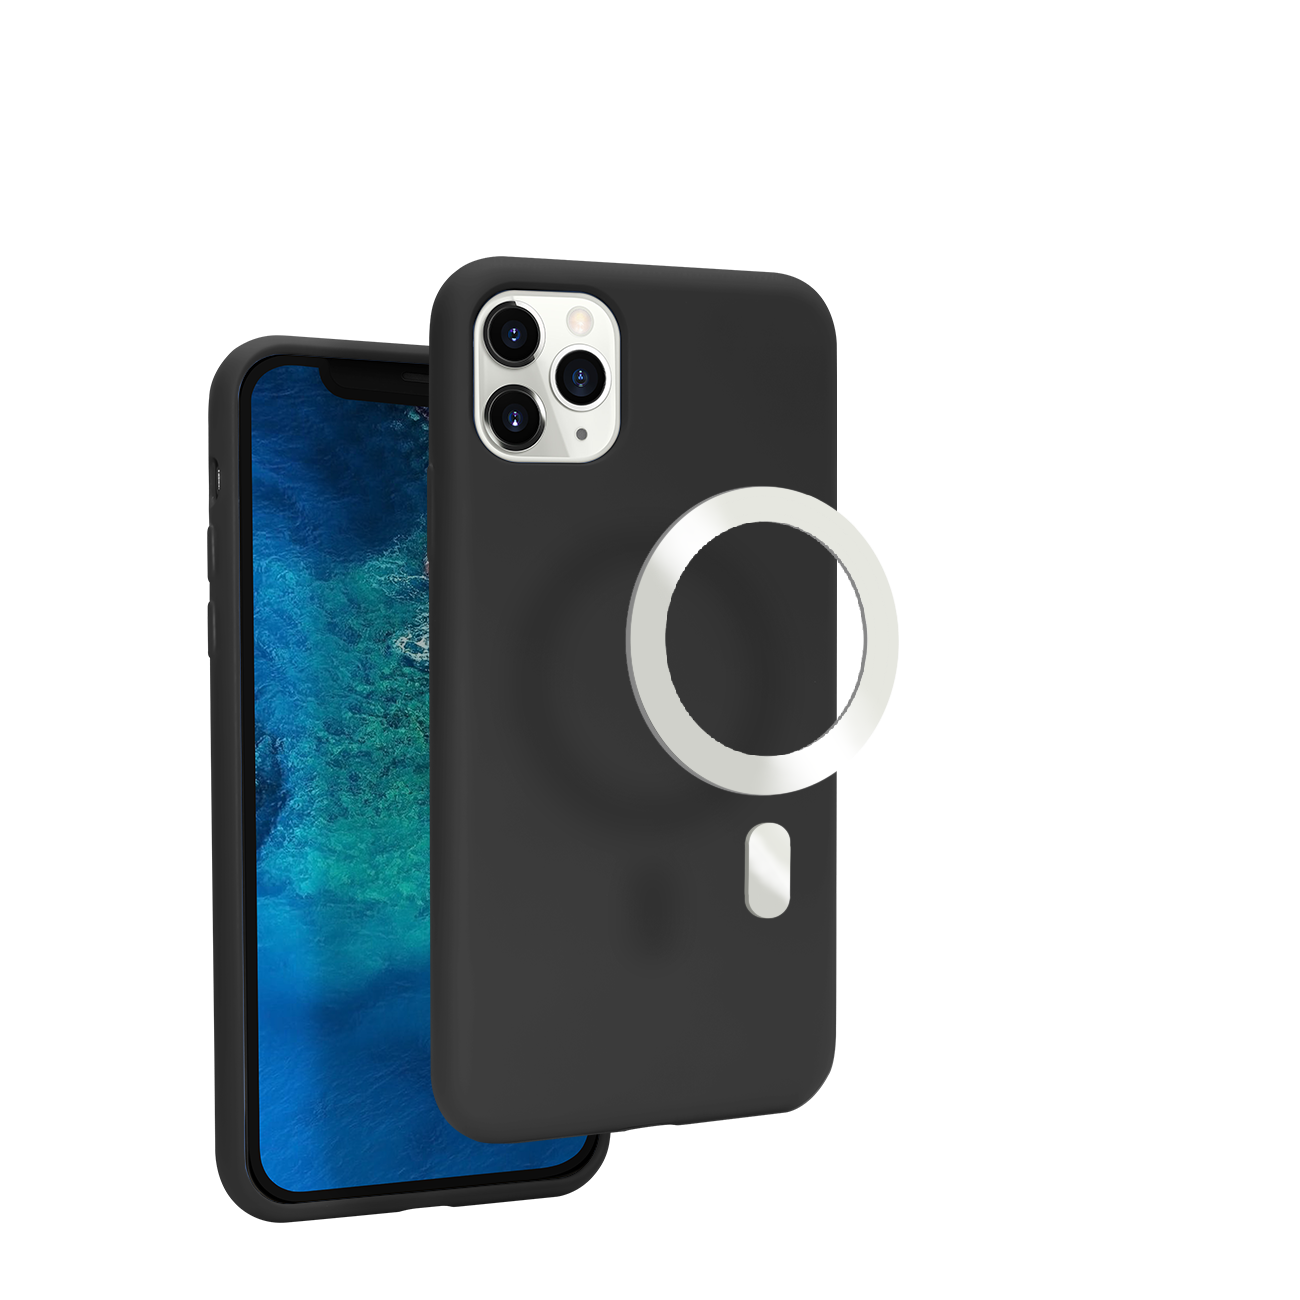 Iphone 11 Pro Max Silicon Soft Touch Cases Price in pakistan